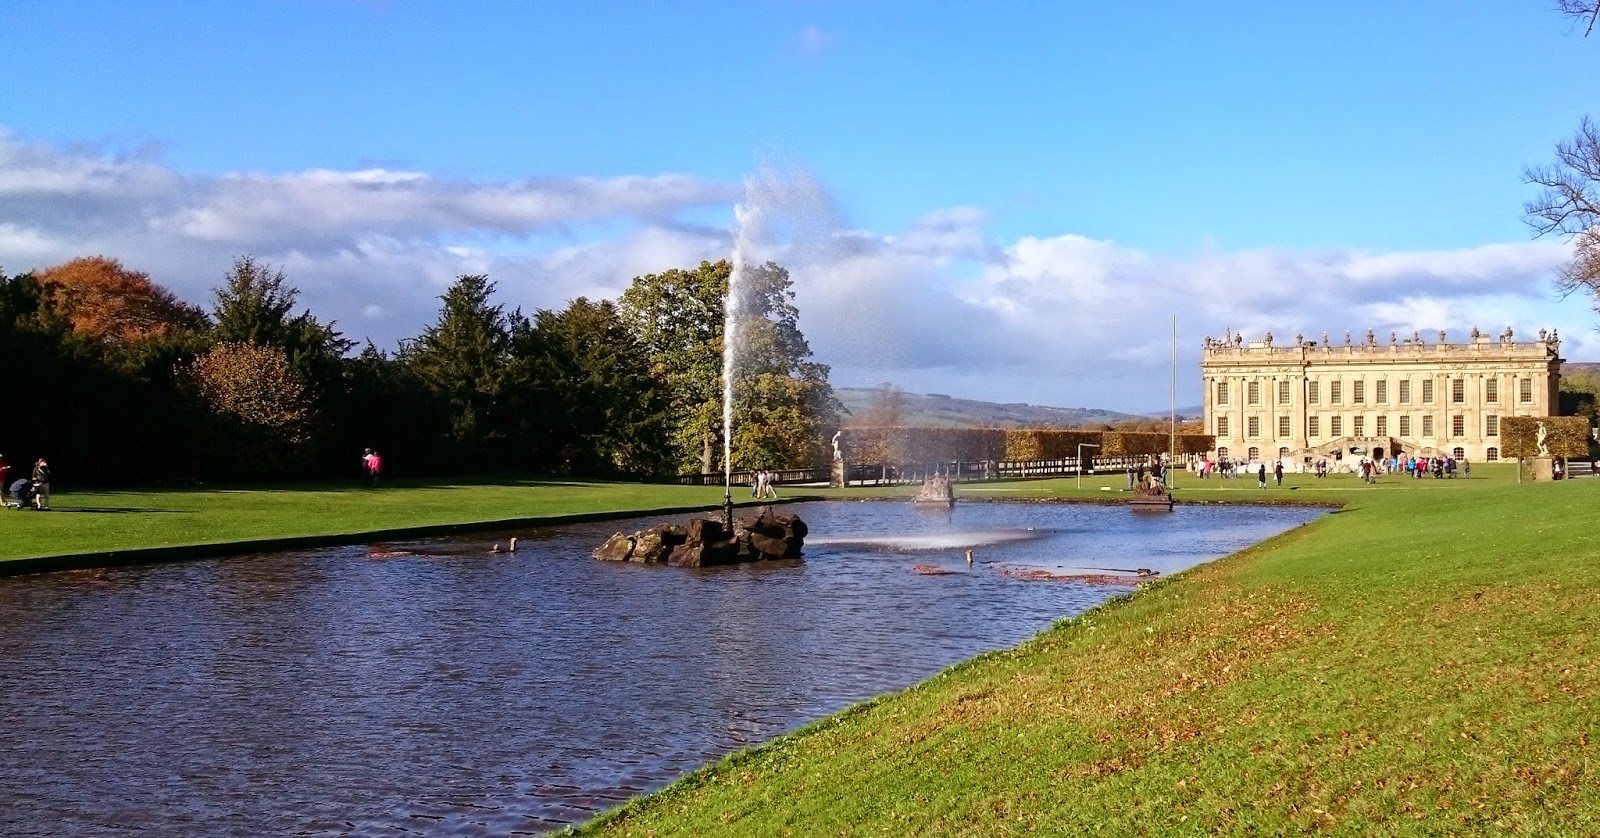 The Emperor Fountain with Chatsworth House in the background